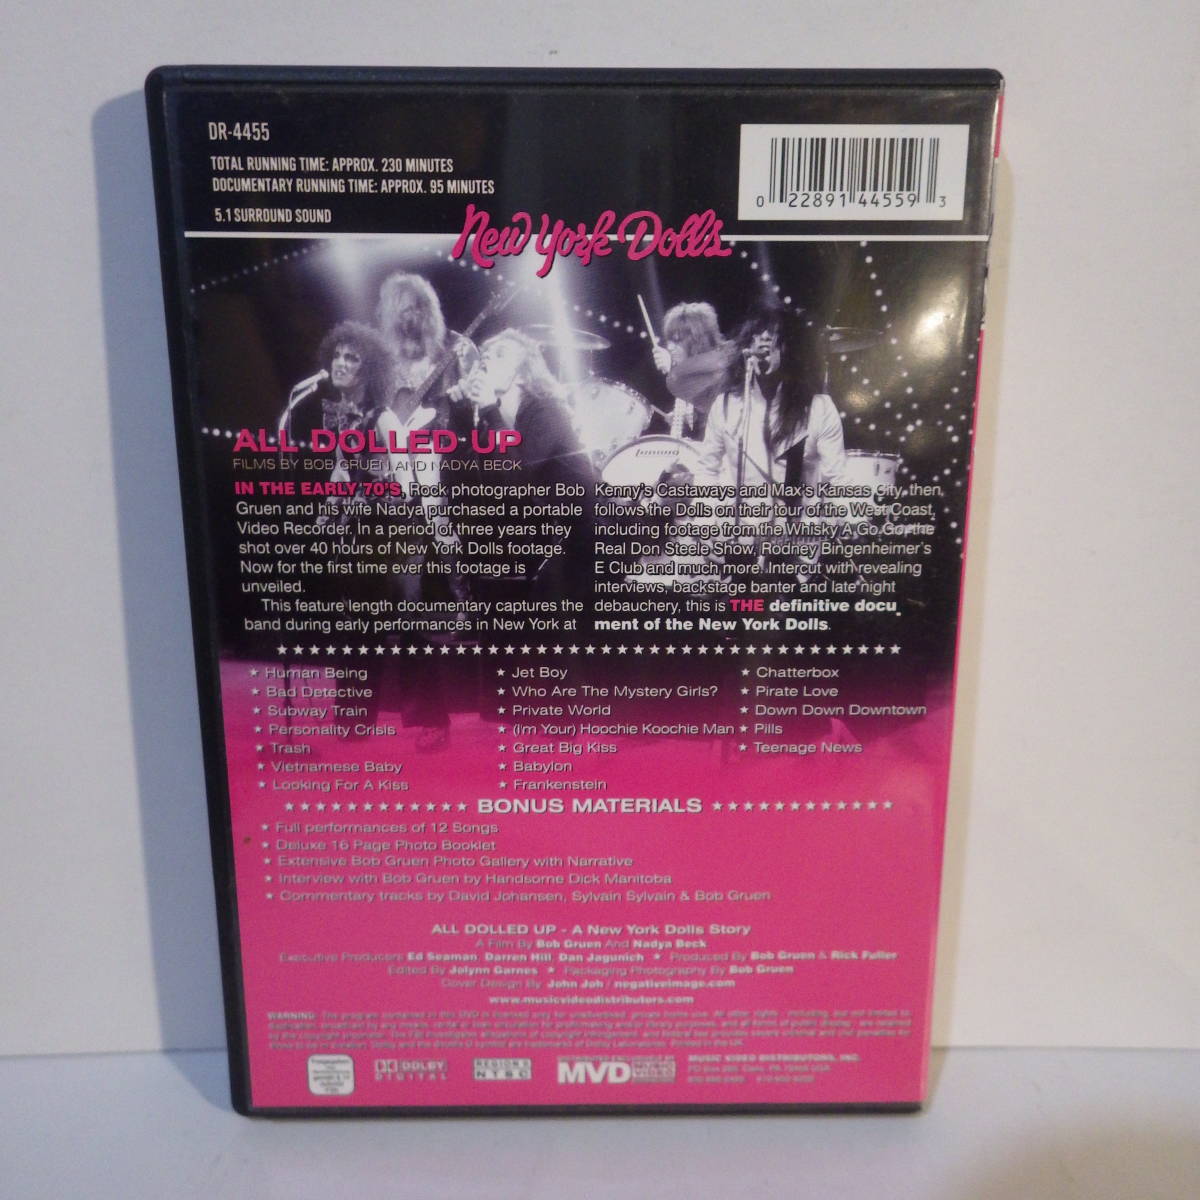  abroad record Region0[DVD]New York Dolls All Dolled Up New York * doll z. documentary image compilation [ used ]